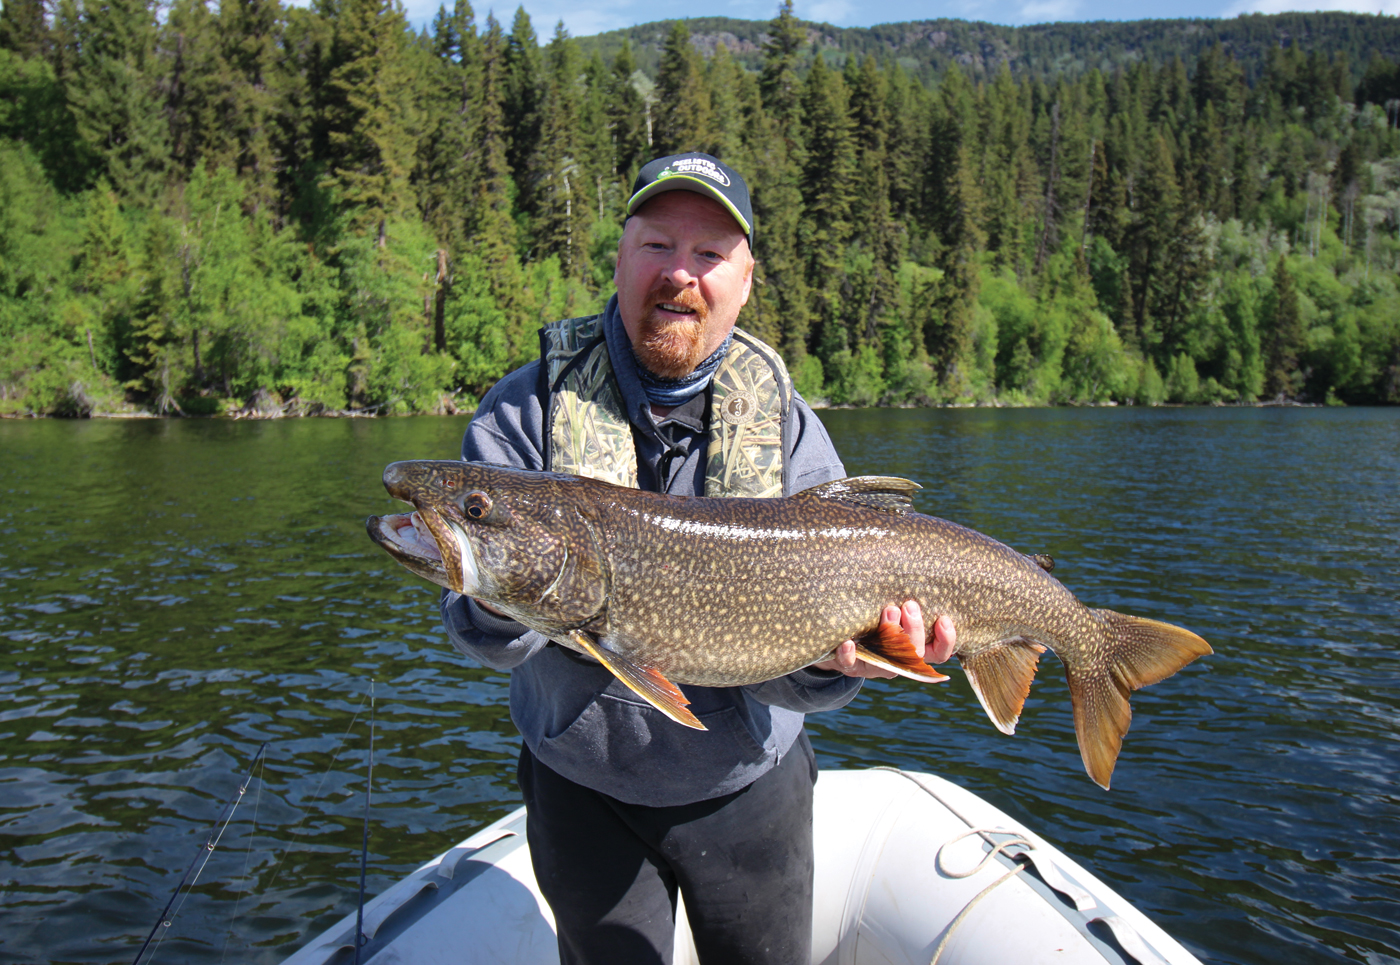 Scott Stewart, host of fishing show Reelistic Outdoors, displays a Lake Trout he caught in June 2018 on Cunningham Lake, B.C. Stewart, a lifelong fisherman and conservationist, says he tries to return each fish he catches safely back to the water. Photo by Jeff Christensen